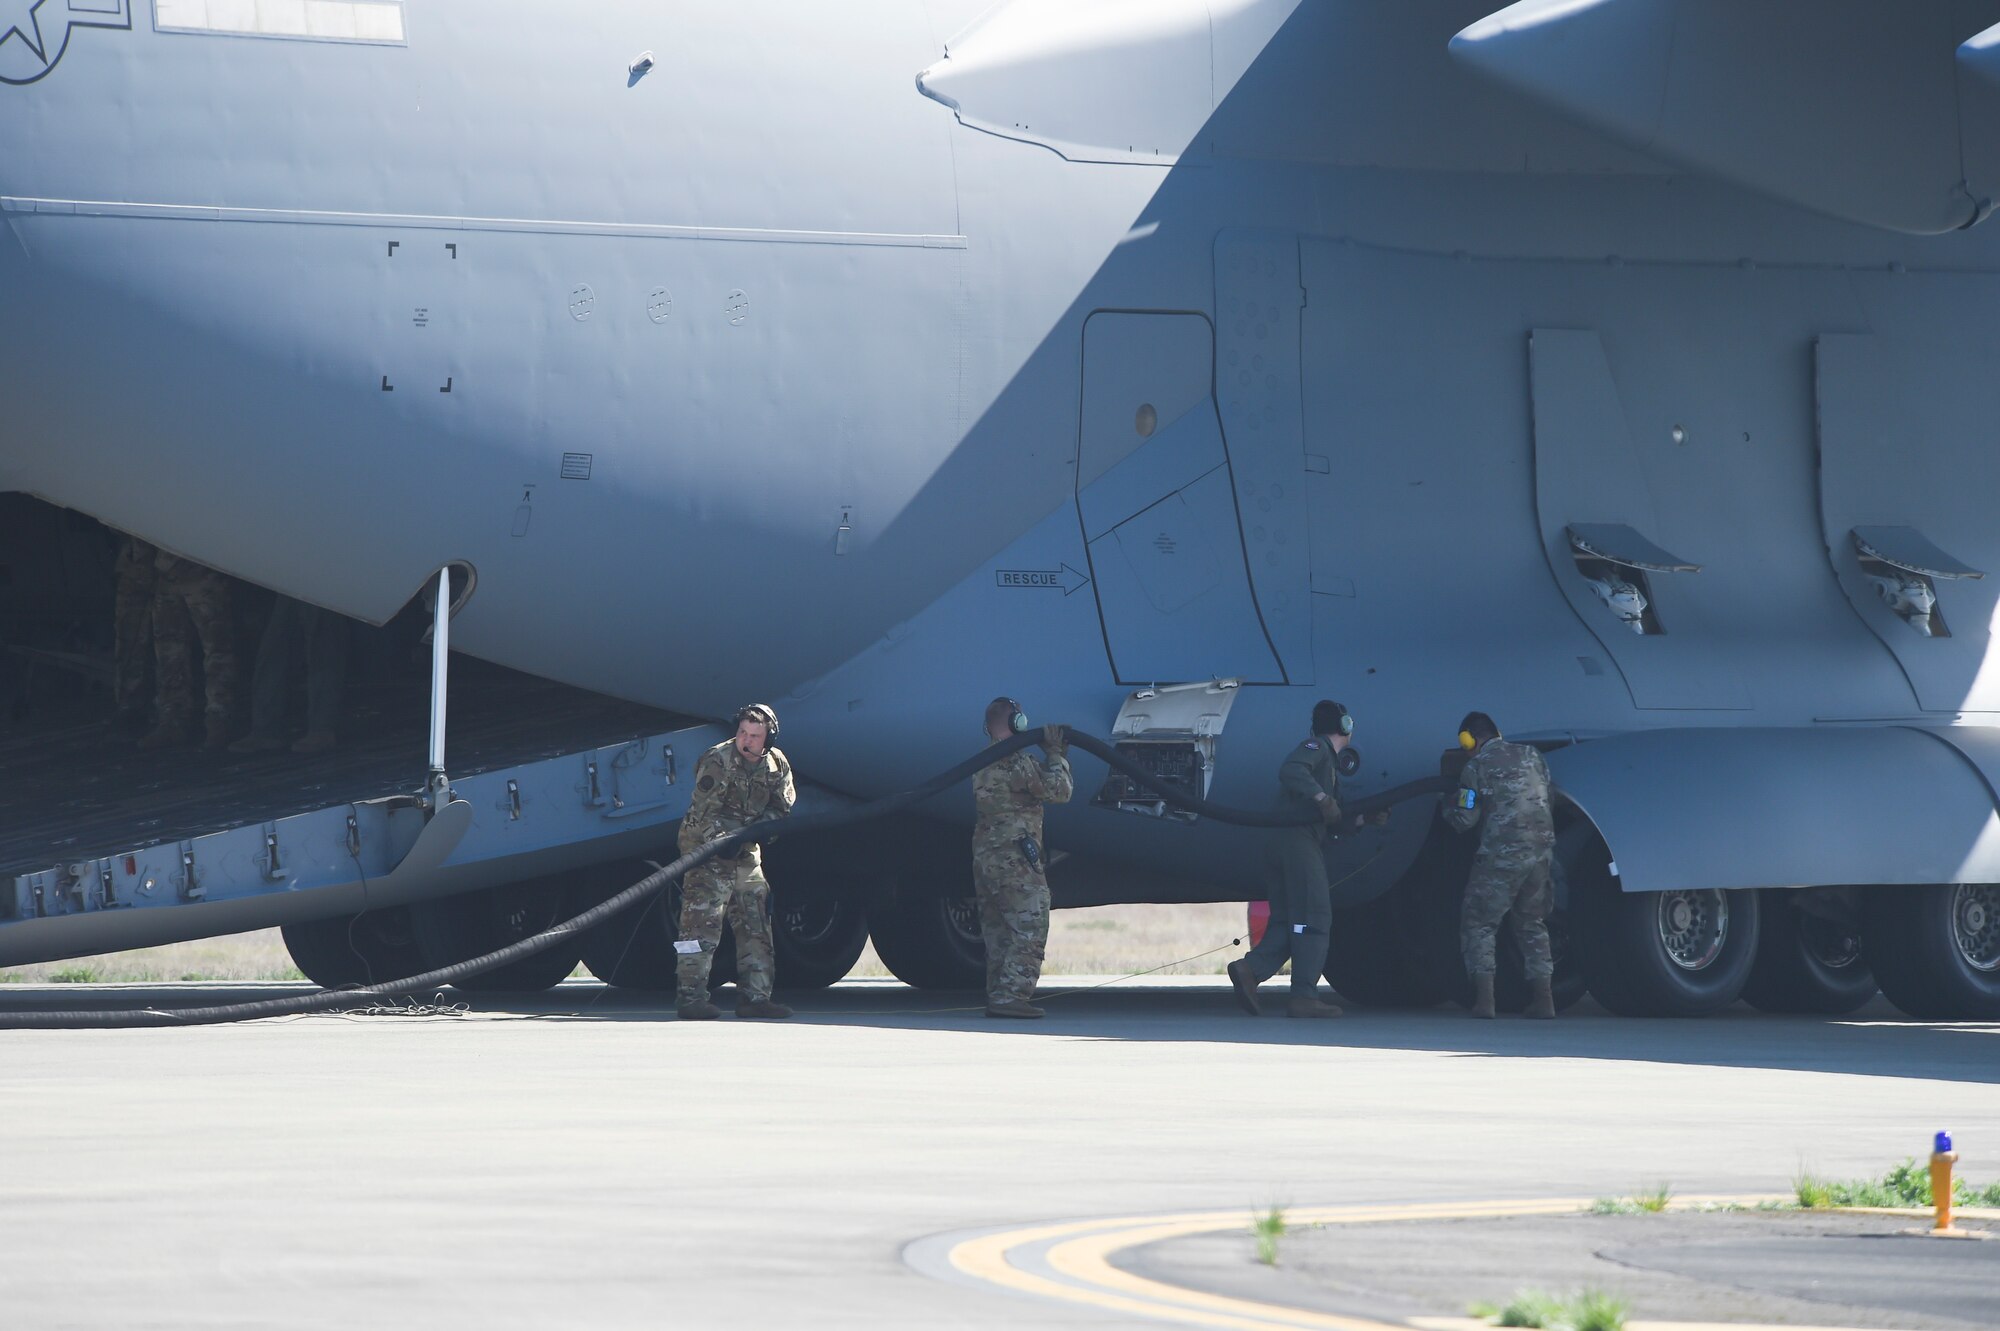 Airmen with the 62nd Operations Group connect a fuel hose to a C-17 Globemaster III during a wet-wing defuel procedure at Joint Base Lewis-McChord, Washington, April 21, 2021, as part of Exercise Rainier War. The exercise tests the 62nd Airlift Wing’s capability to plan, generate and execute a deployment tasking, sustain contingency operations, demonstrate full spectrum readiness while in a contested, degraded and operationally limited environment. (U.S. Air Force photo by Master Sgt. Julius Delos Reyes)